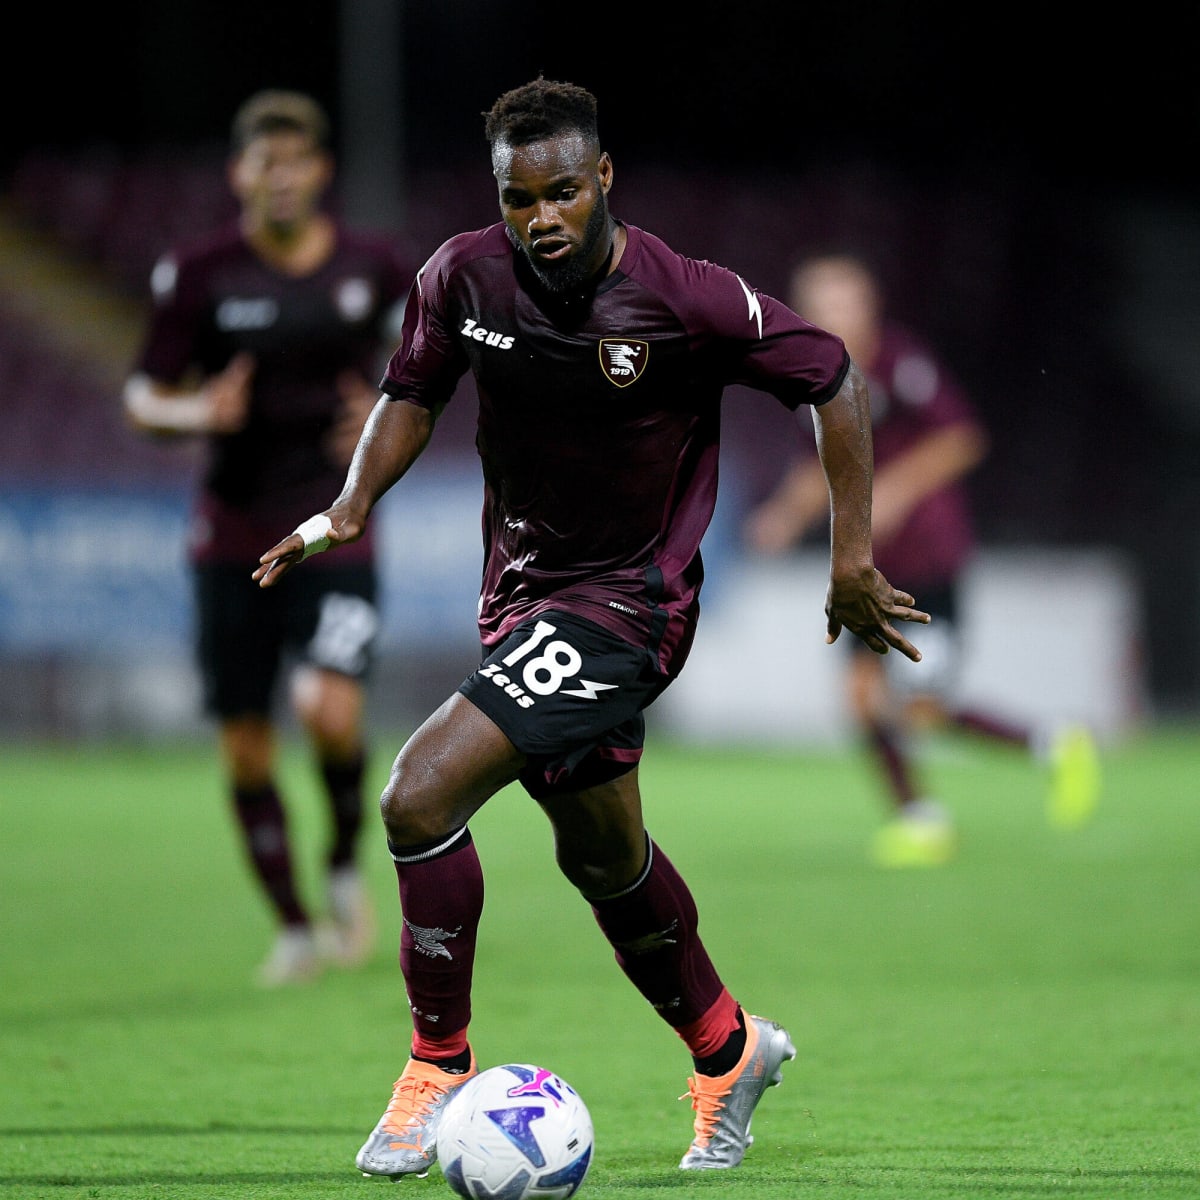 Watch Salernitana vs Inter Milan in Canada Stream Serie A live - How to Watch and Stream Major League and College Sports